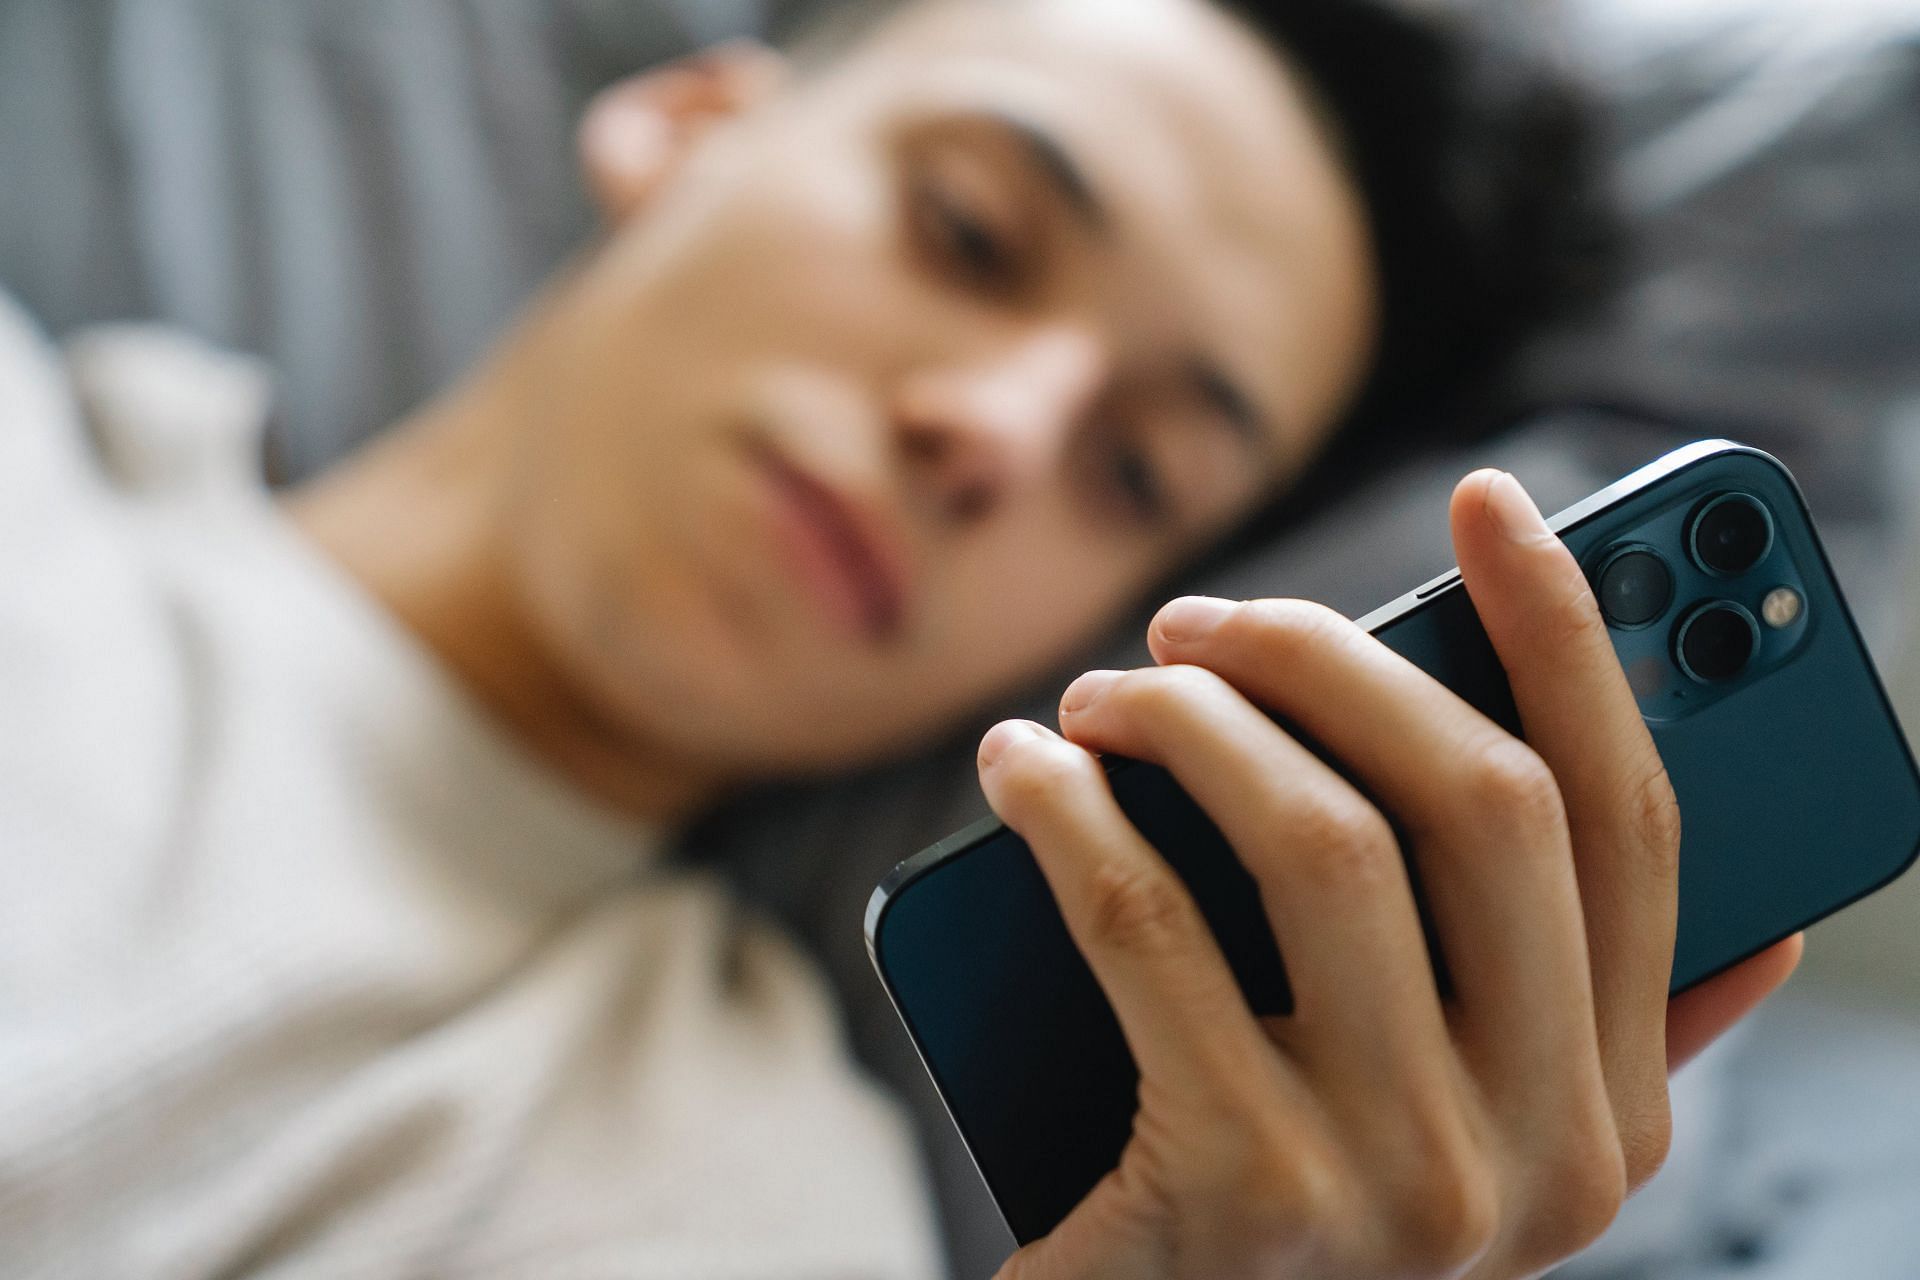 Negative effects of using your digital devices too much (image sourced via Pexels / Photo by eren)